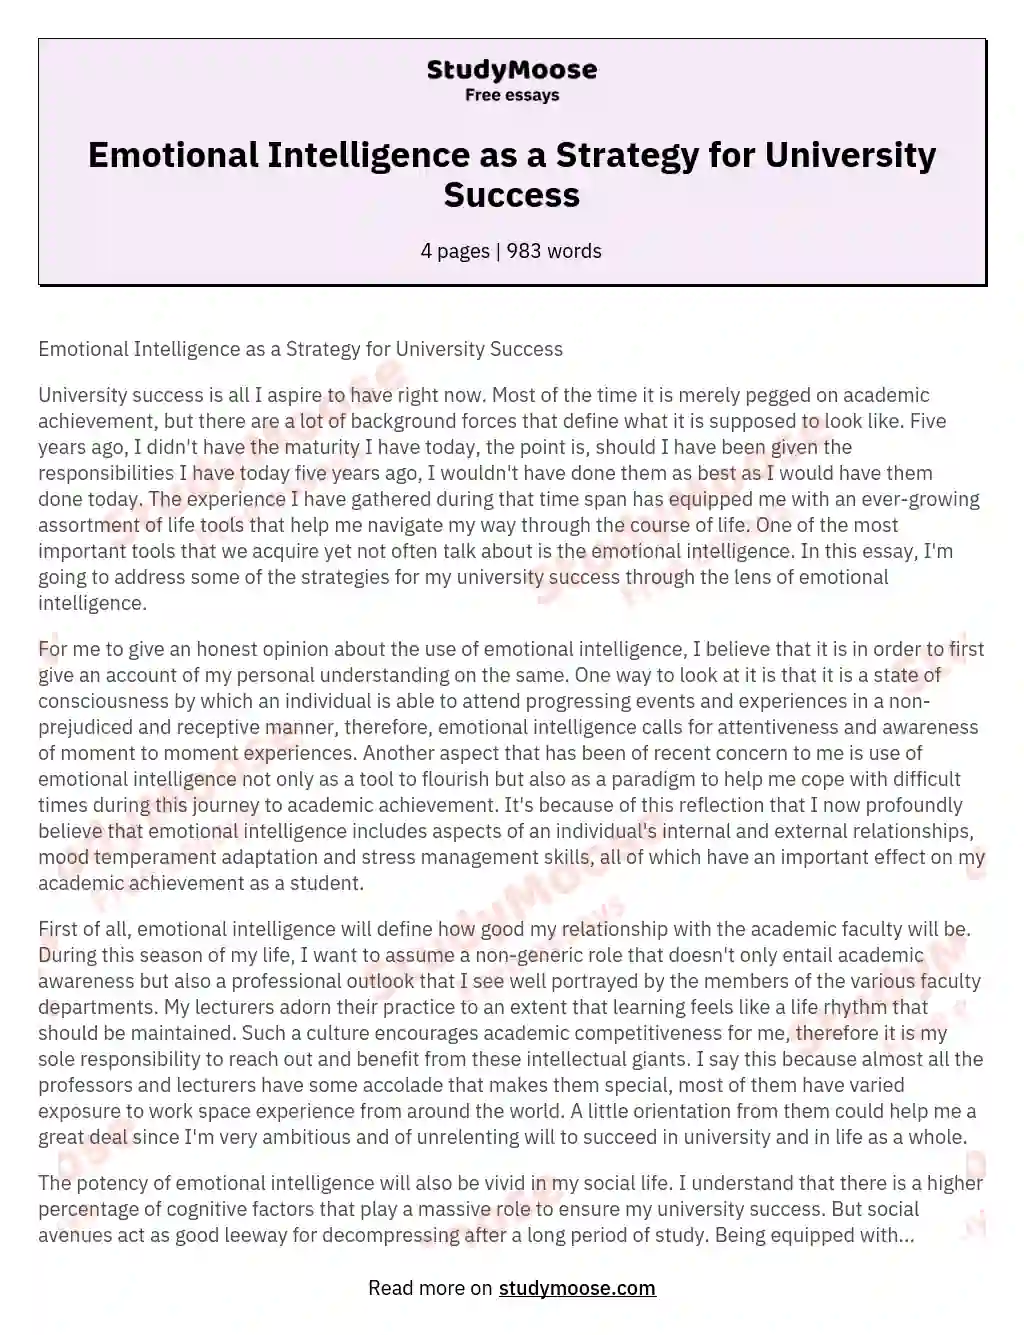 Emotional Intelligence as a Strategy for University Success essay